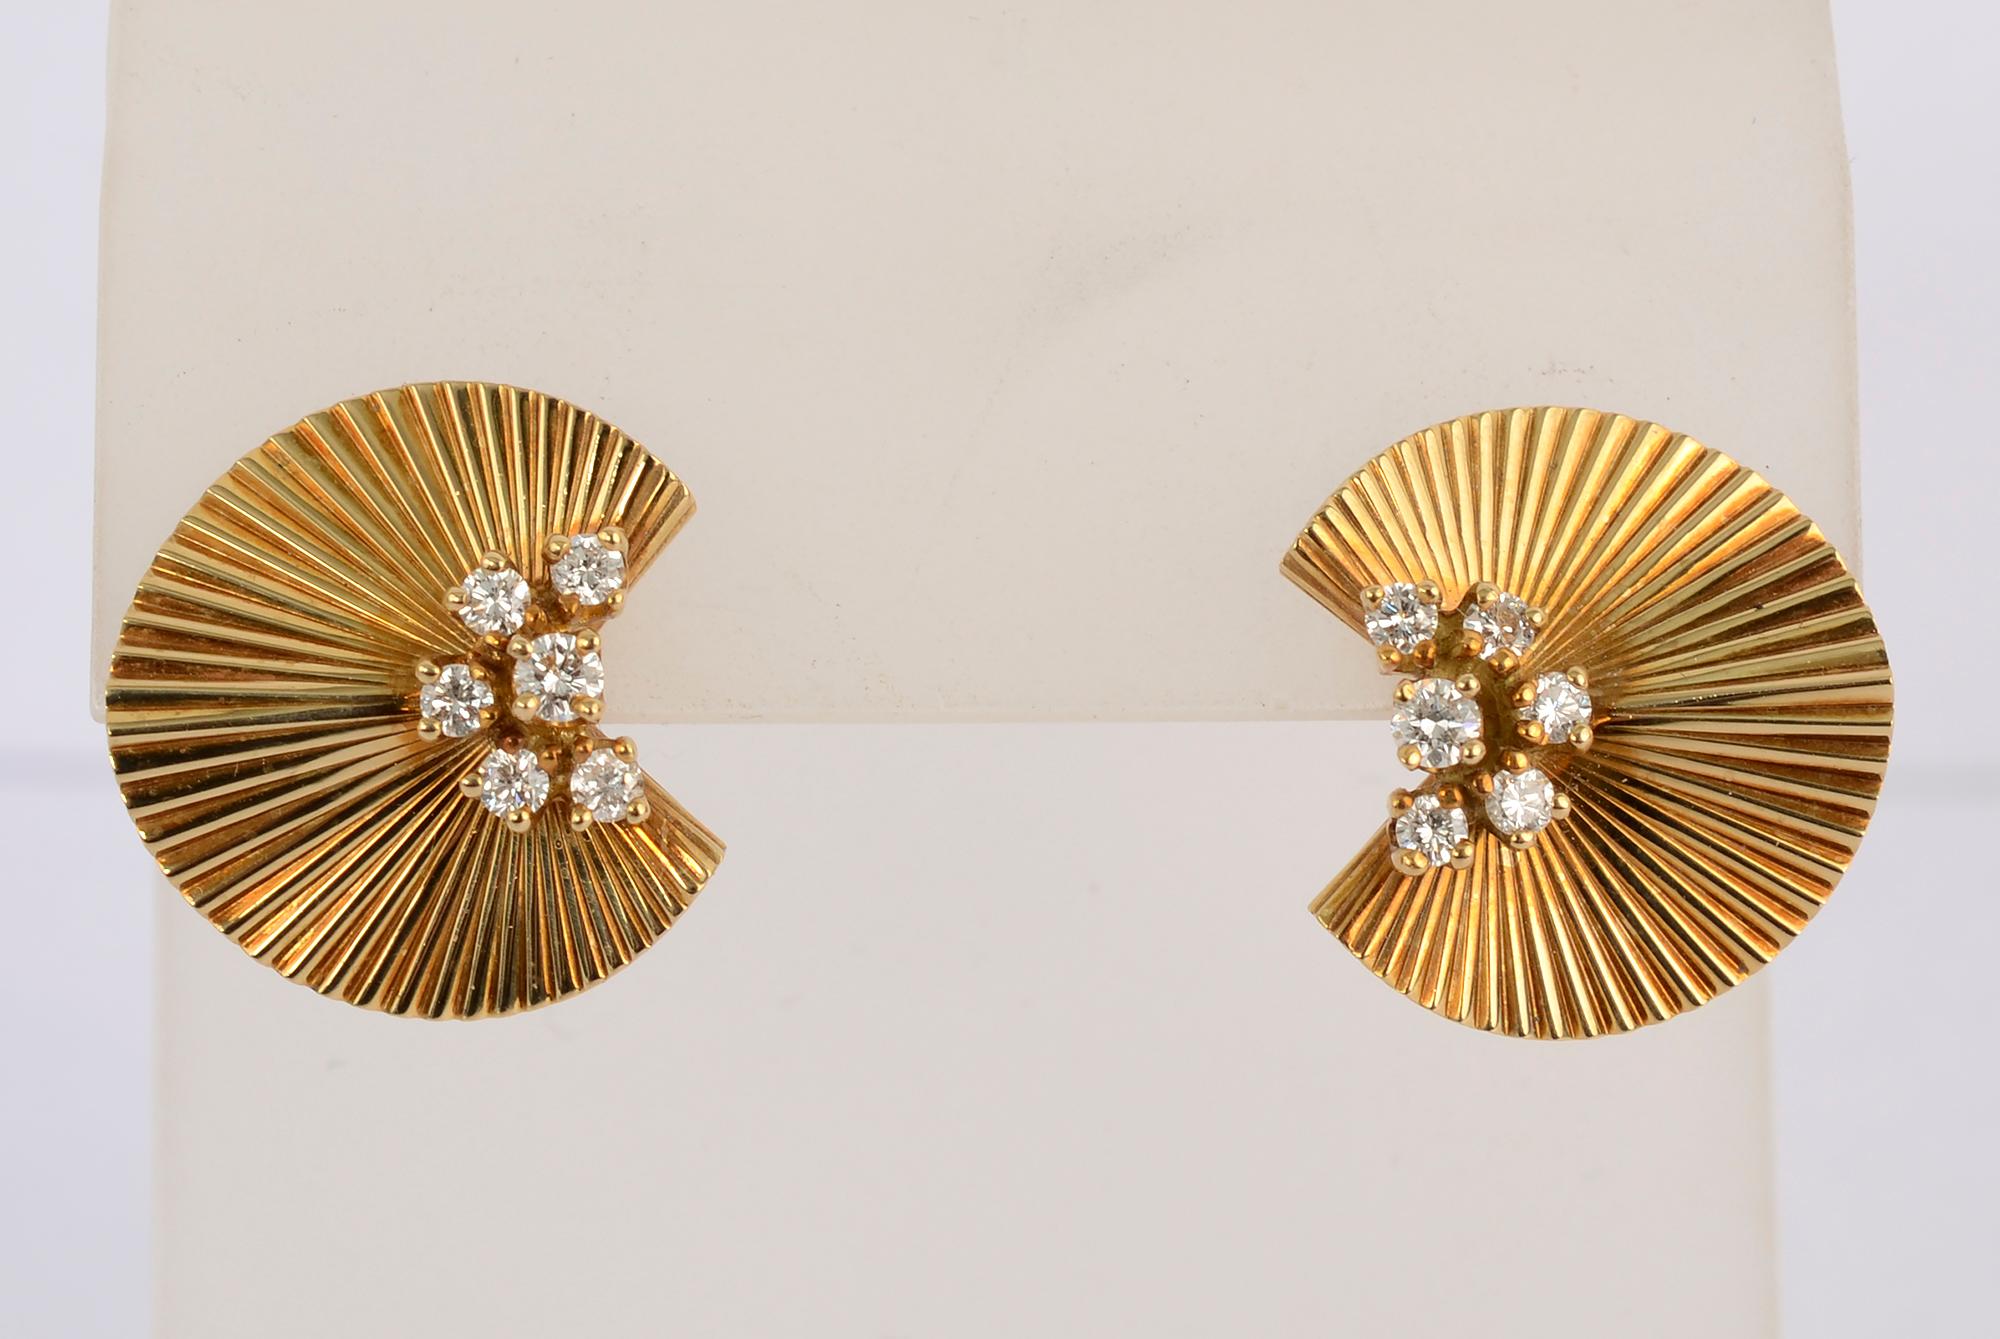 Delicate Retro 18 karat gold earrings by McTeigue in a ruffled design. Each earring has a cluster of 6 round diamonds weighing a total of approximately .37 carats. The backs are posts and clips. Measurements are 3/4